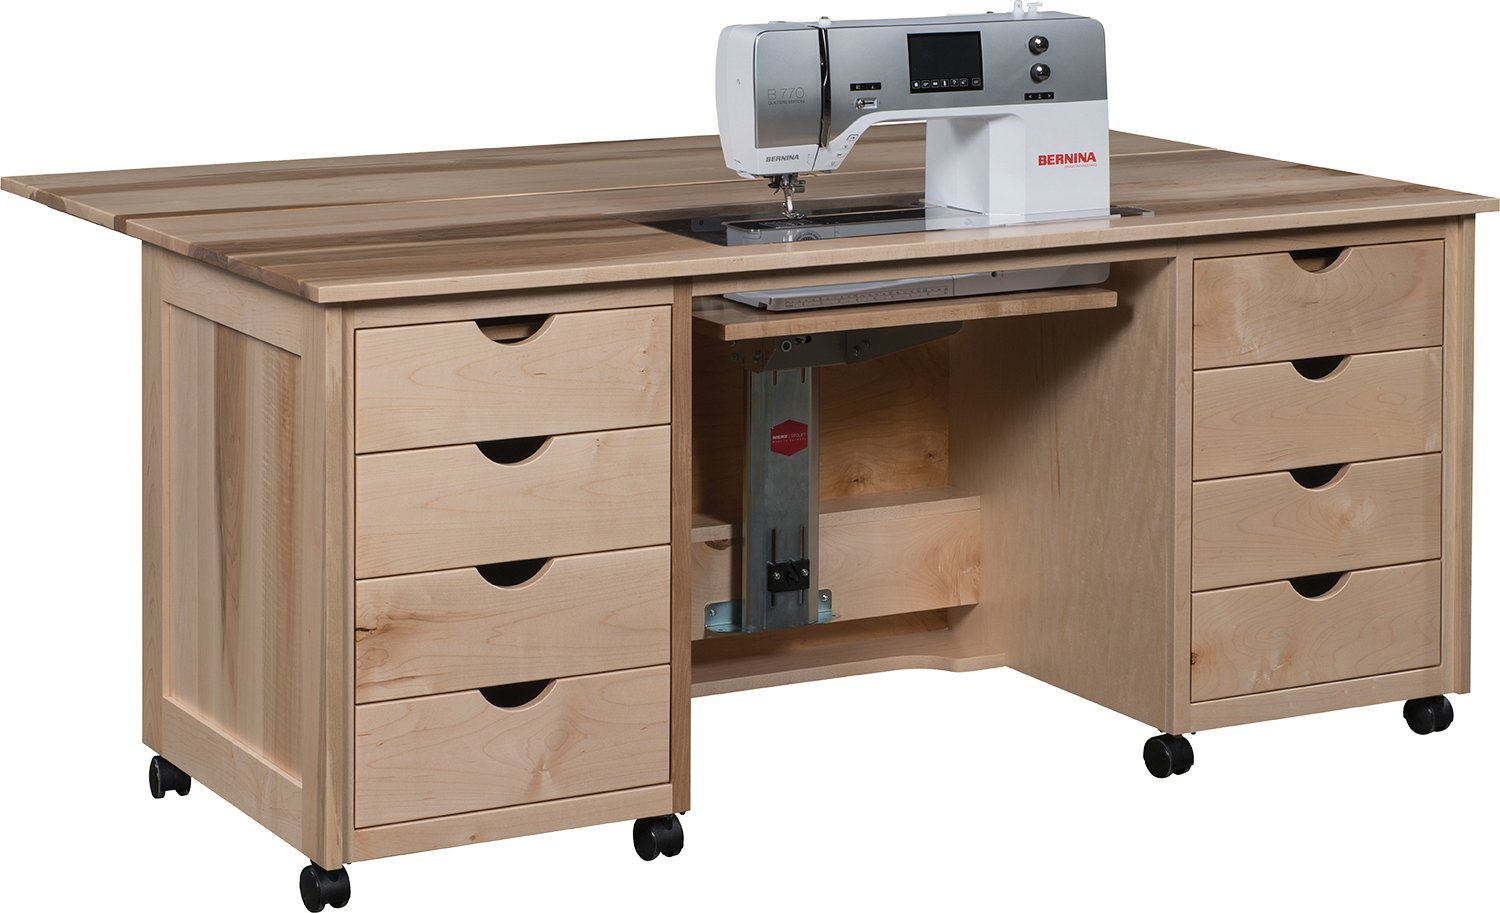 Timberside Woodworking 132-XLFT Flat Top Sewing Cabinet – She Sewing Tables